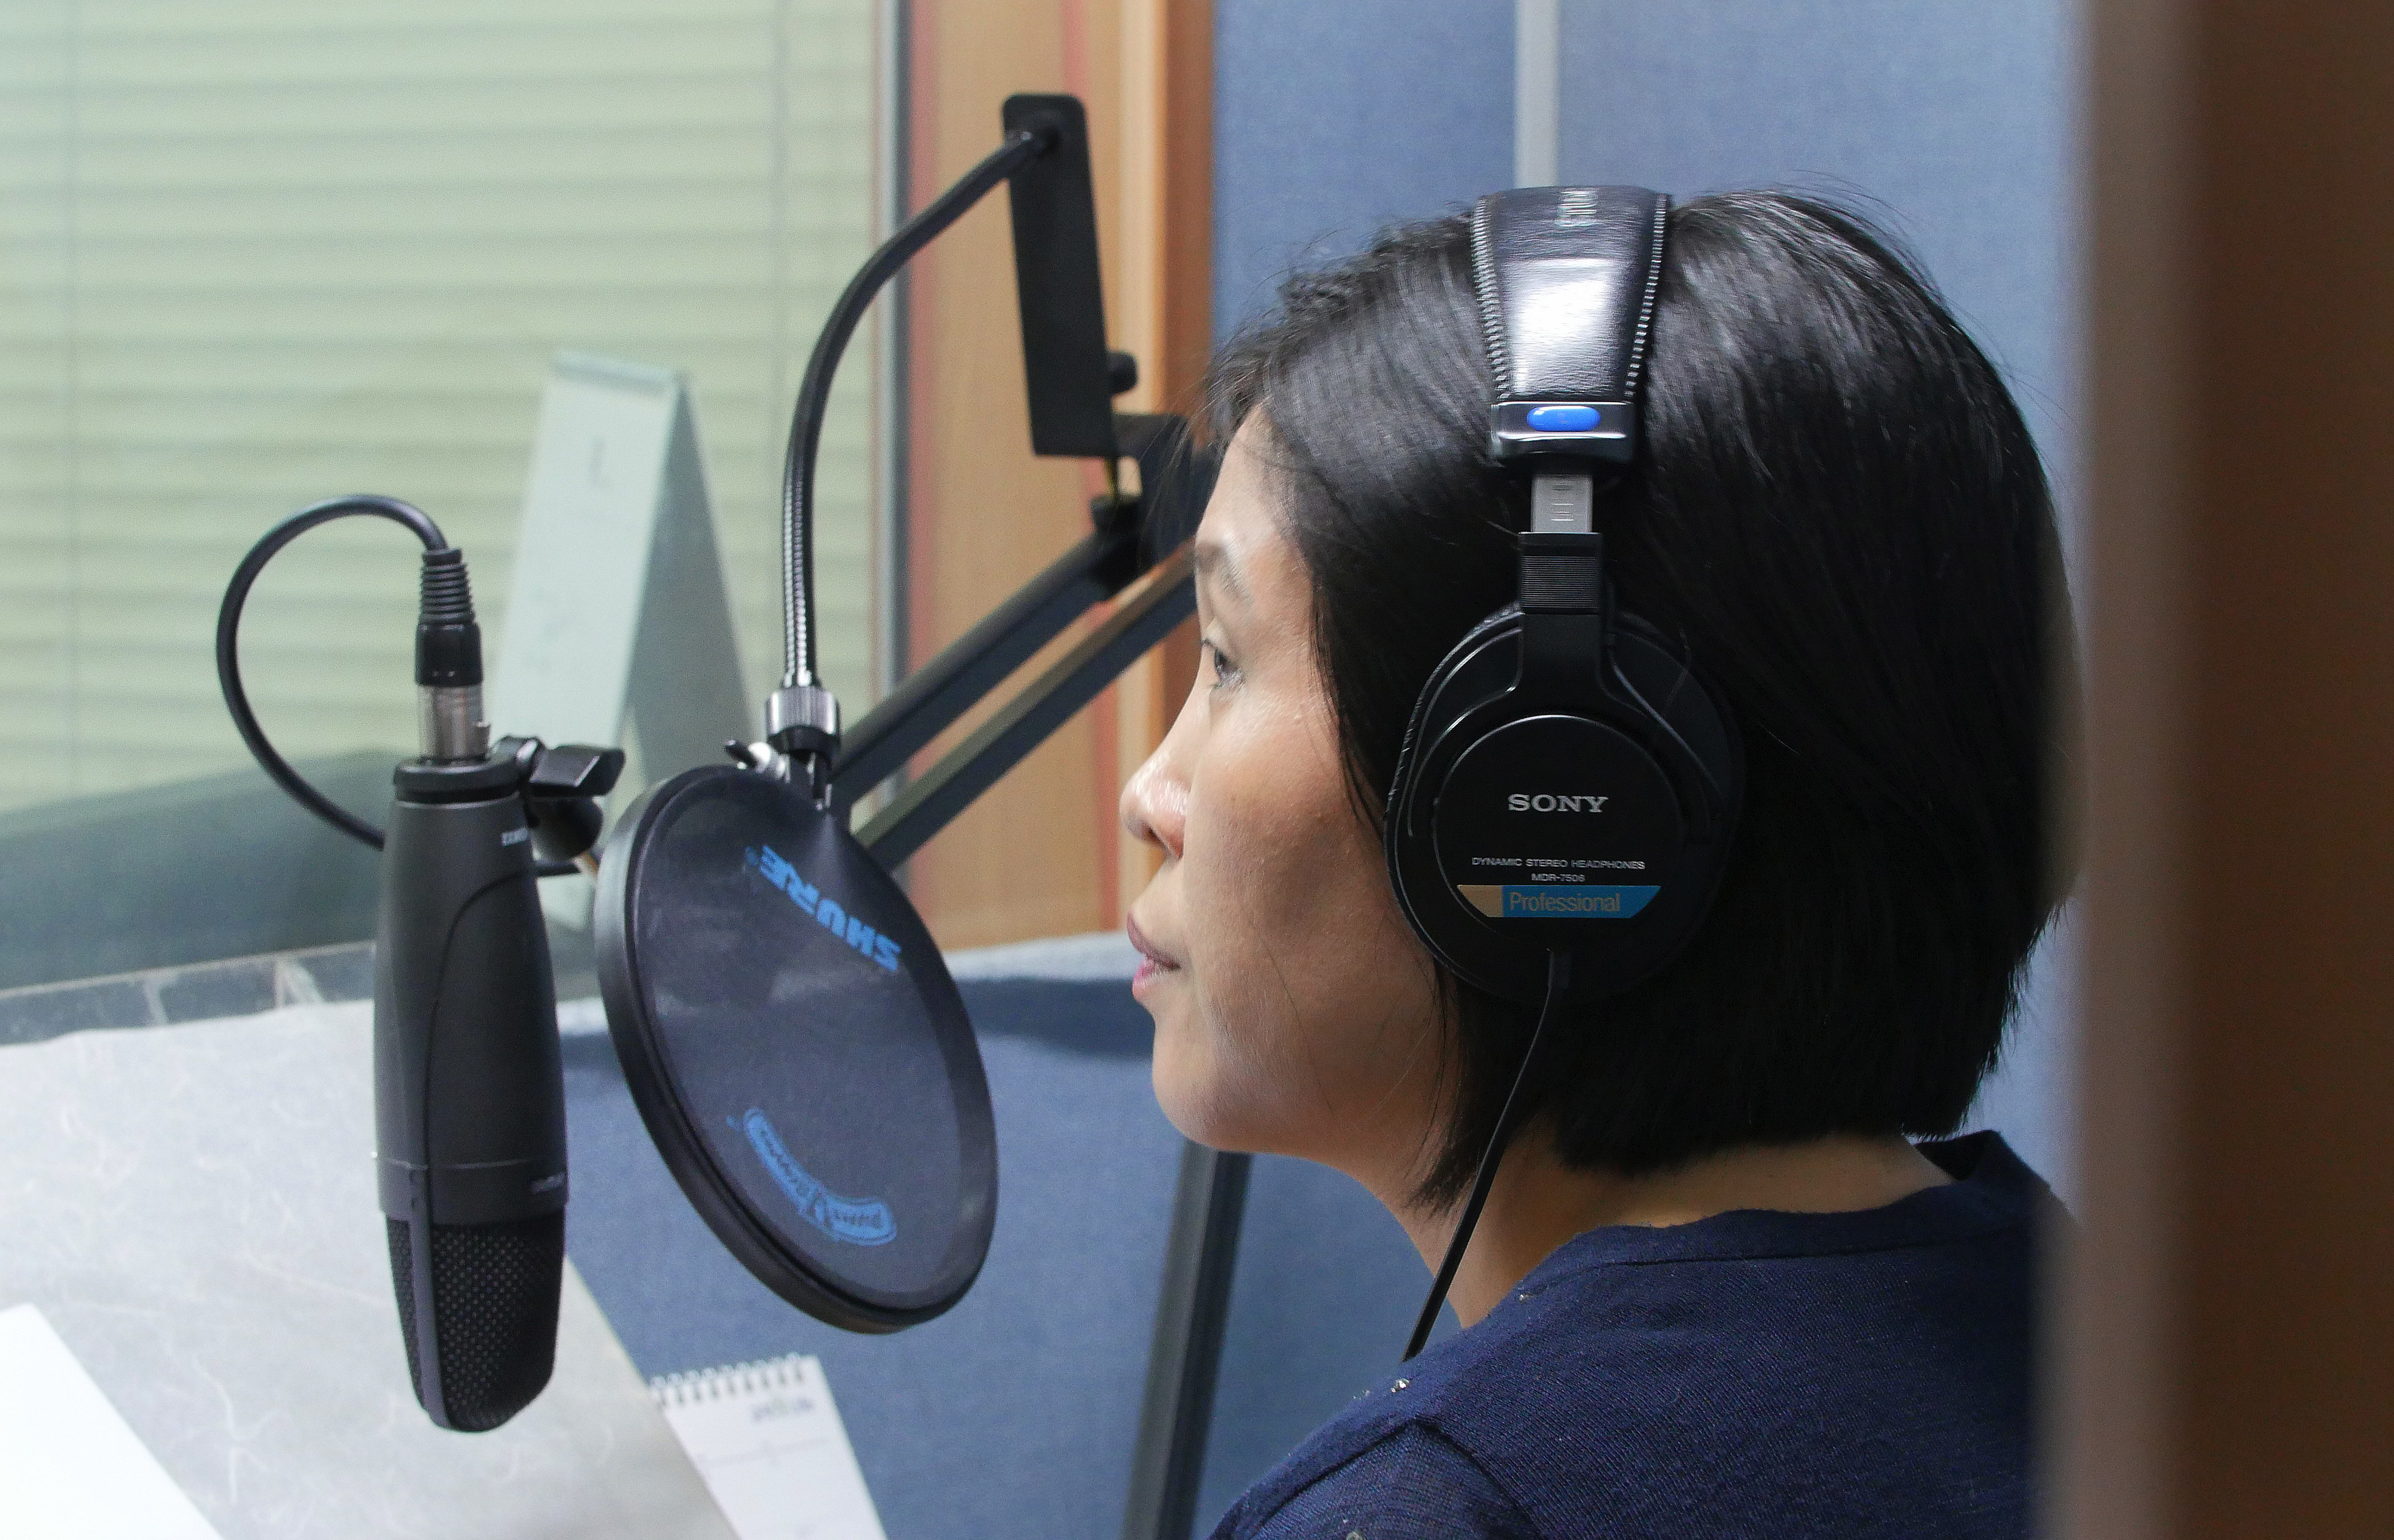 North Korean defector Park Kyung-hwa who works for a Seoul-based shortwave radio station targeting audience in North Korea, demonstrates how she records her broadcast at a church in Seoul, South Korea, on Aug. 25, 2016. Park, who fled the North in 2000 before being sold to a Chinese man, said she saw brokers grope other trafficked women many times. She said brokers kicked and beat her with wooden clubs for about 20 minutes when her first attempt to escape failed. (AP Photo/Jungho Choi)